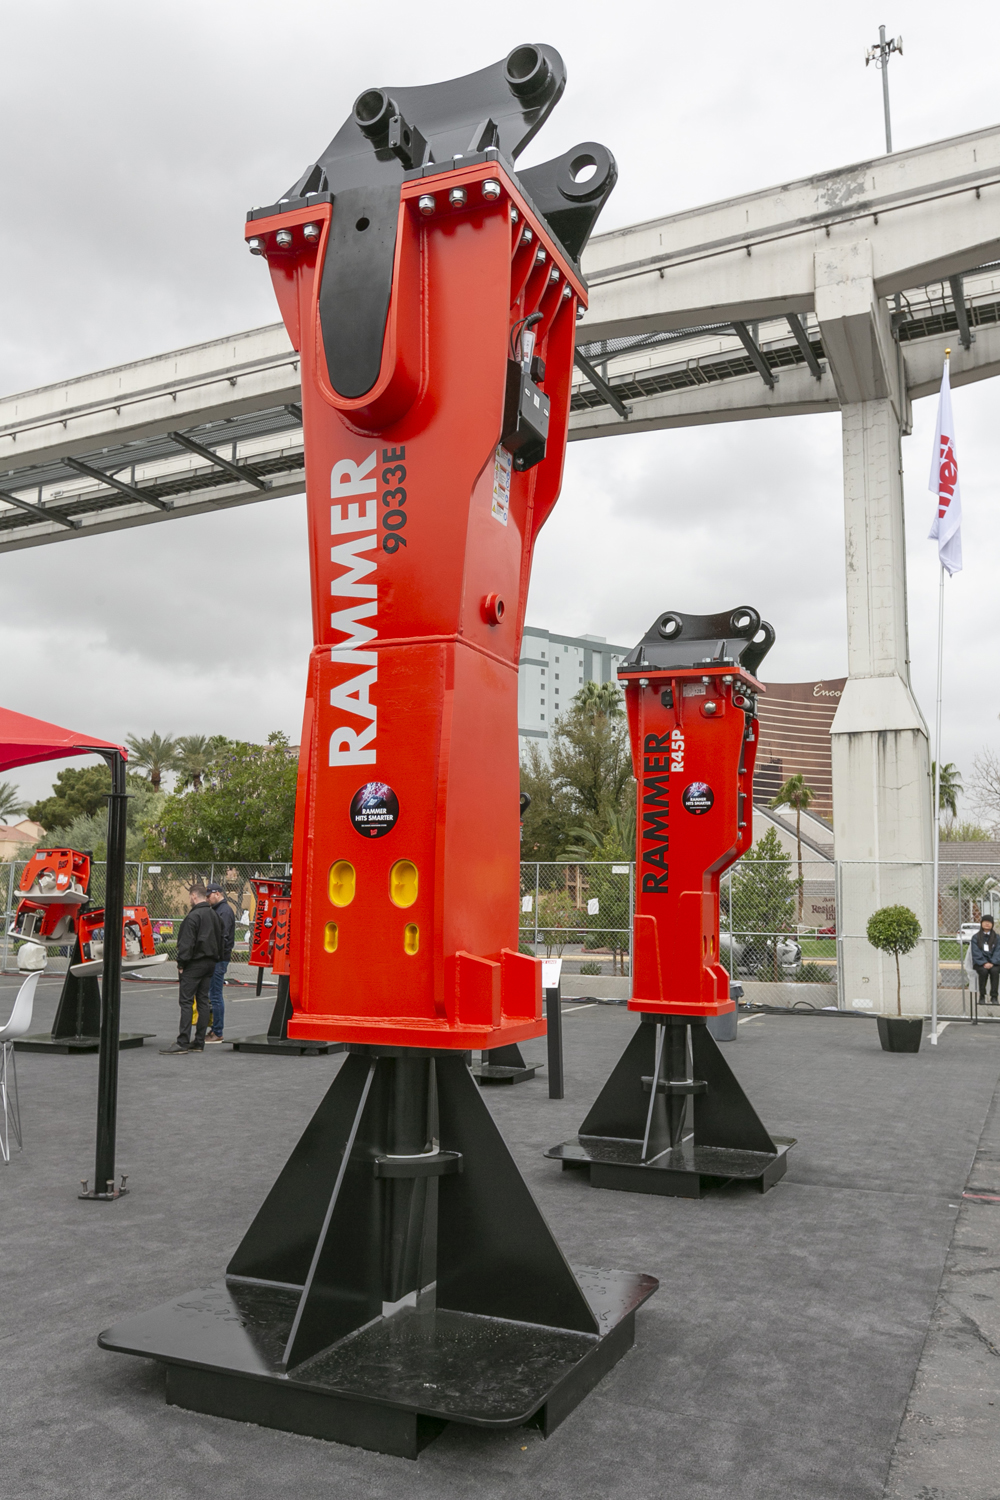 Rammer’s new 9033E hammer was showcased at the CONEXPO-CON/AGG 2020 exhibition 